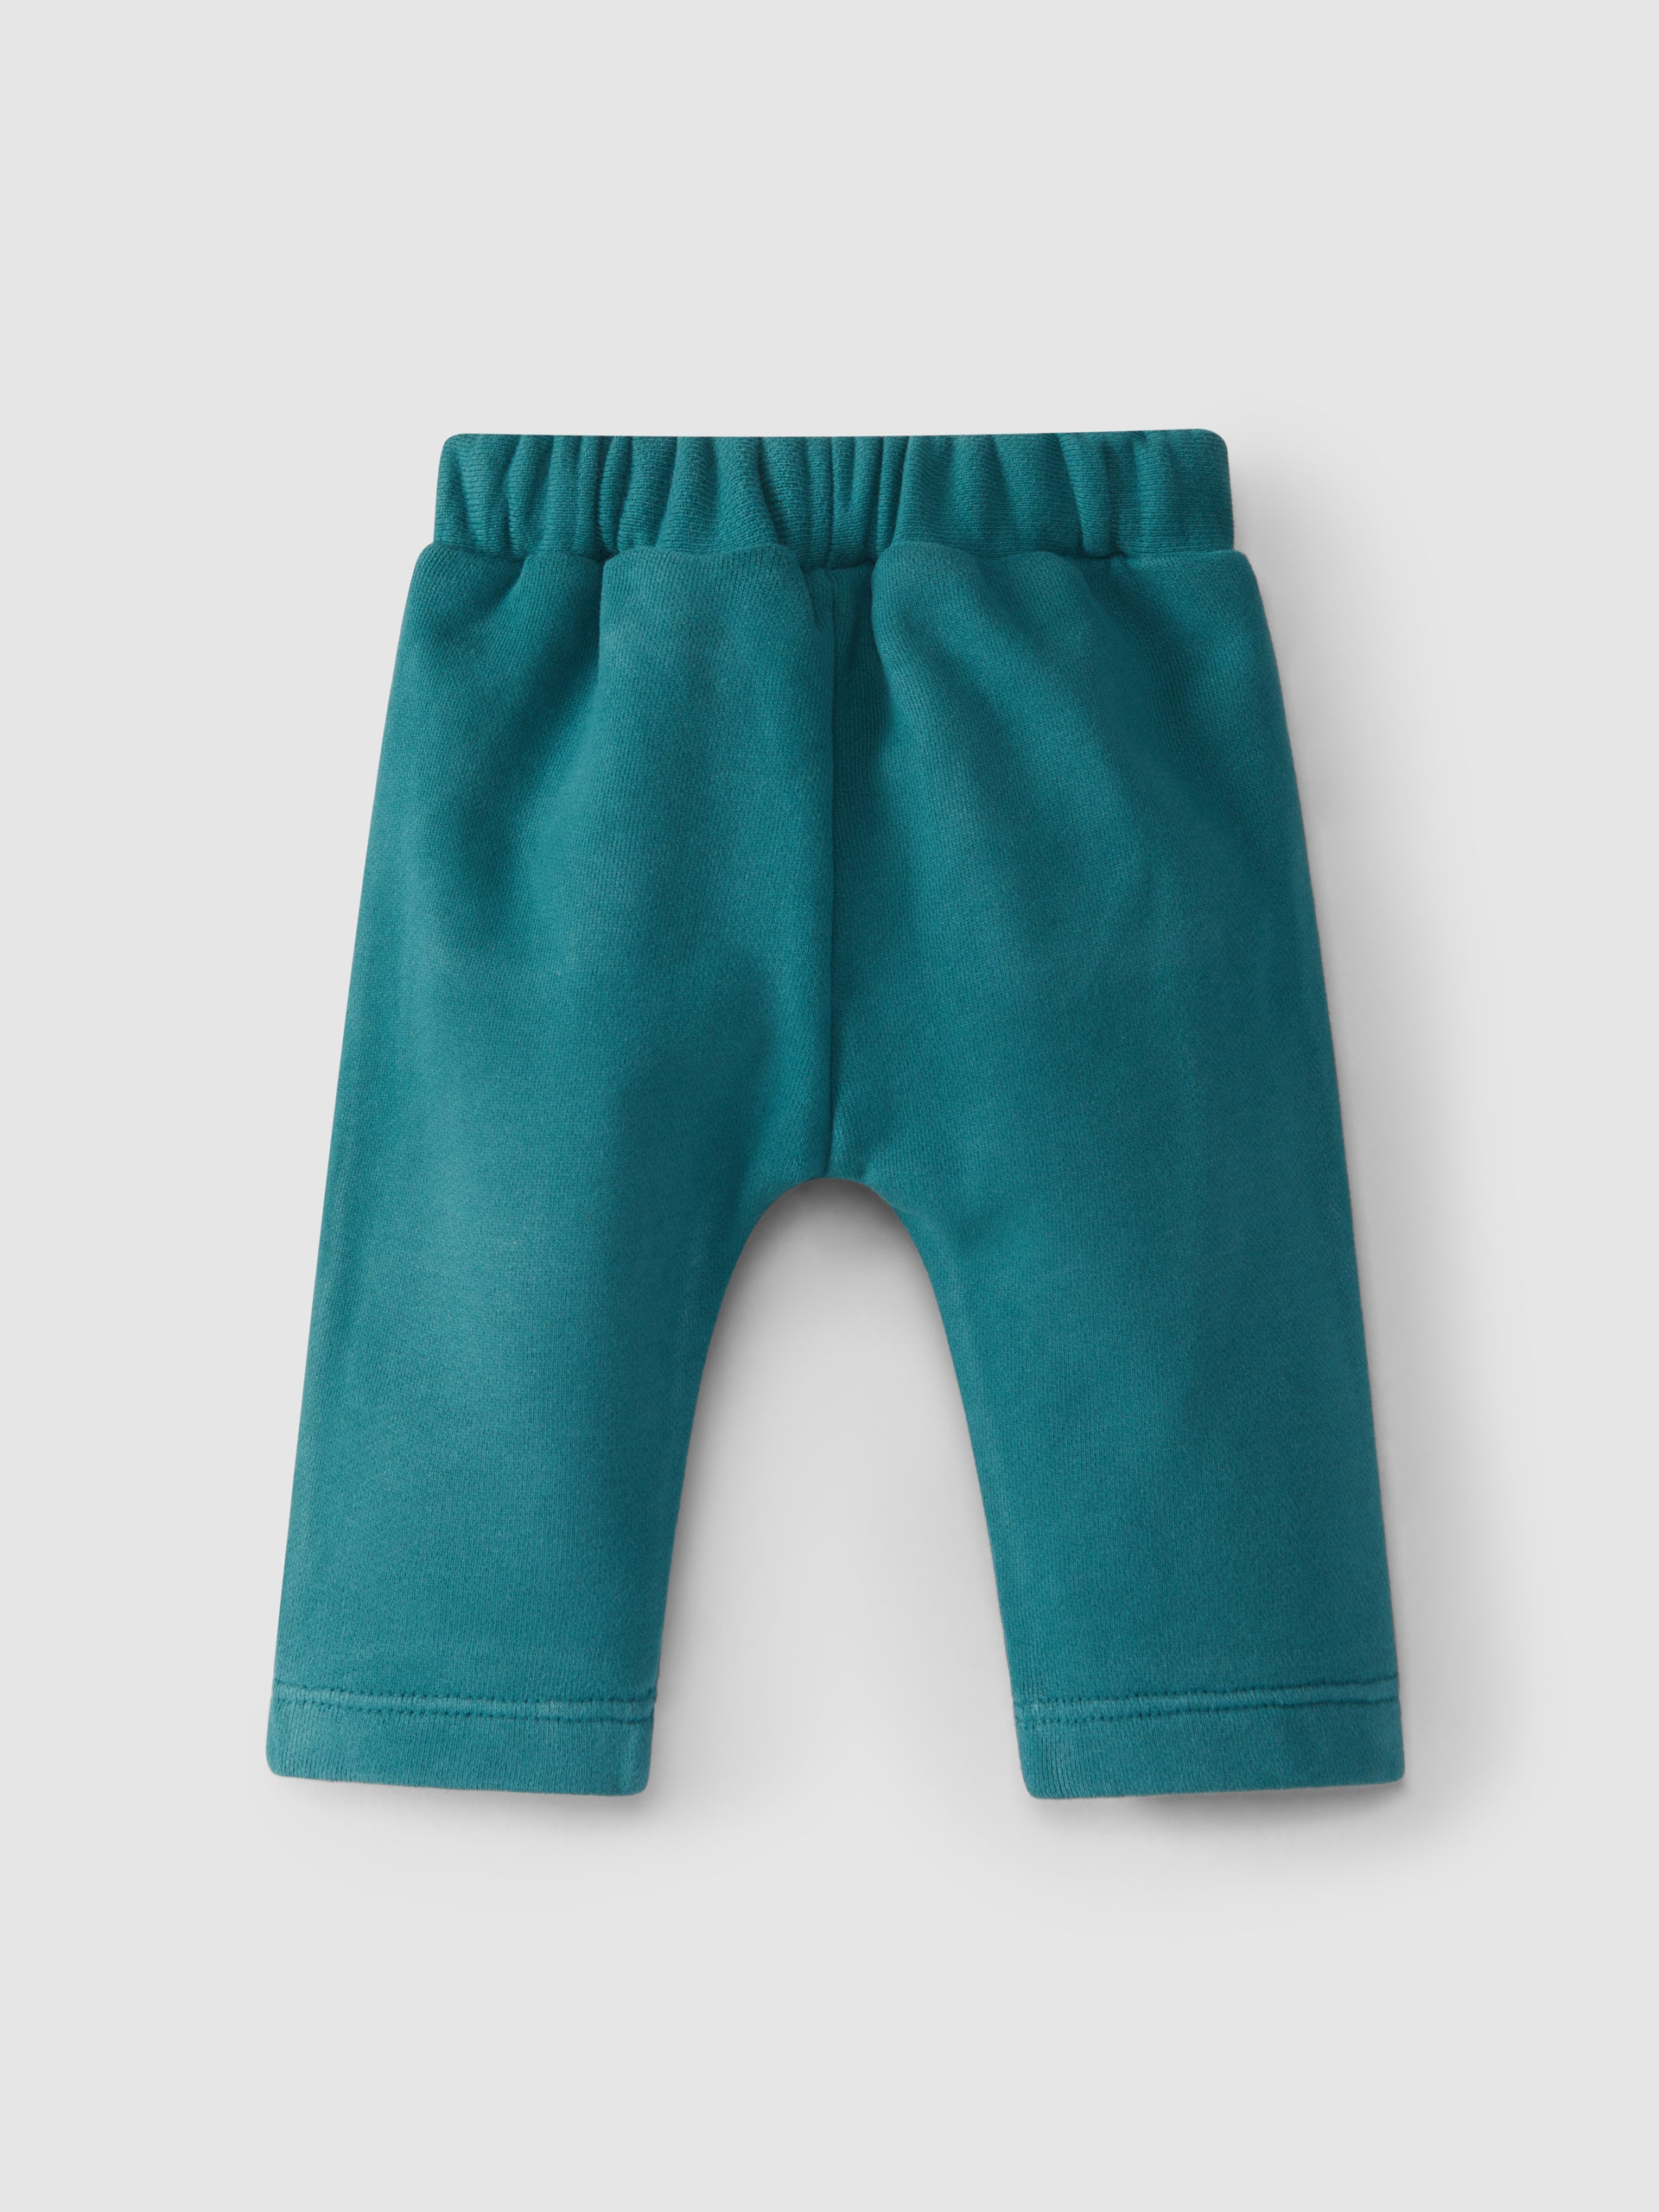 PLUSH PULL-UP PANTS WITH POCKETS